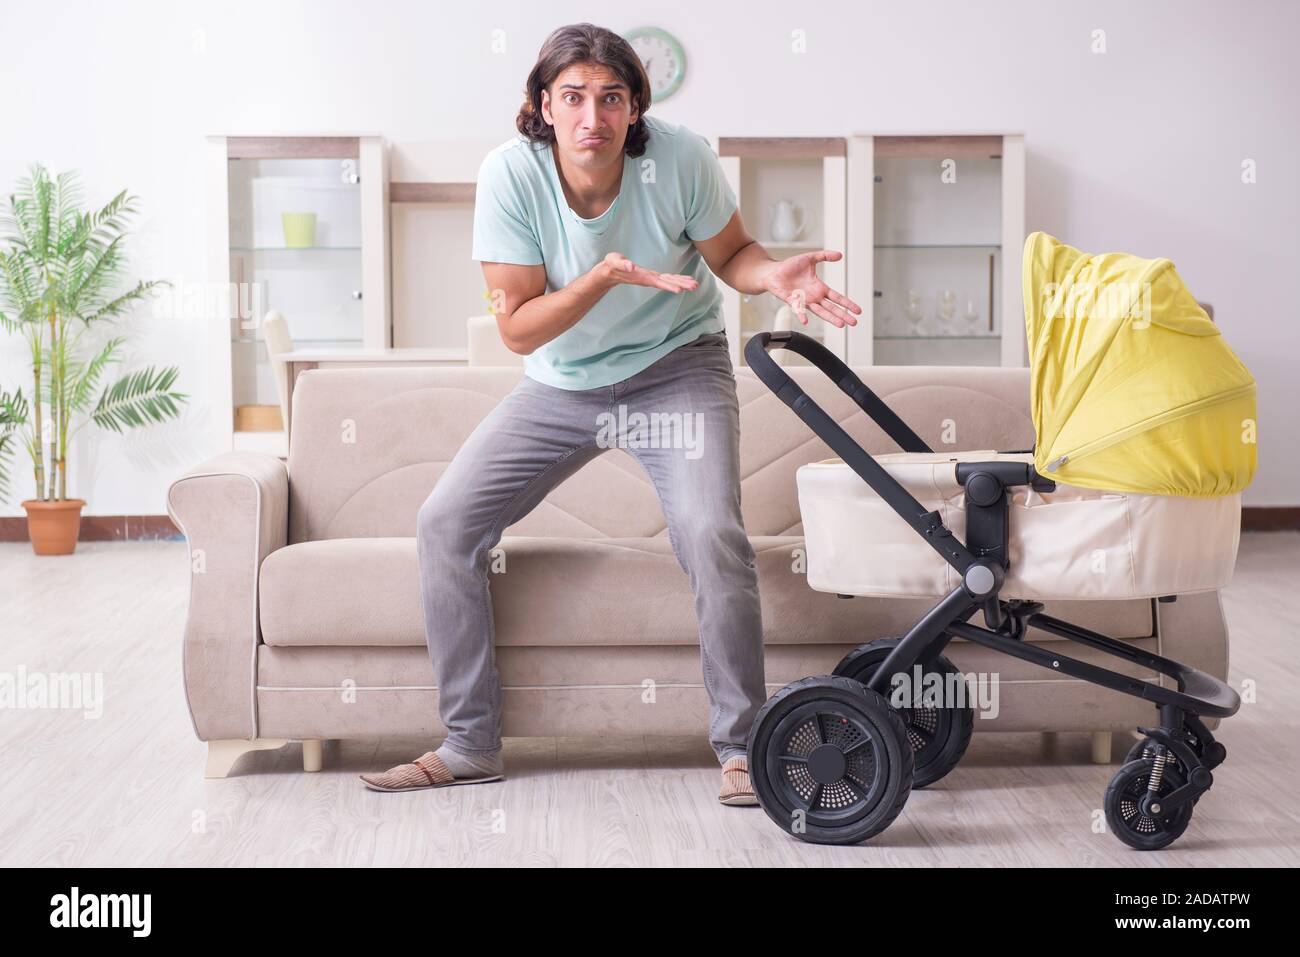 Young man looking after baby in pram Stock Photo